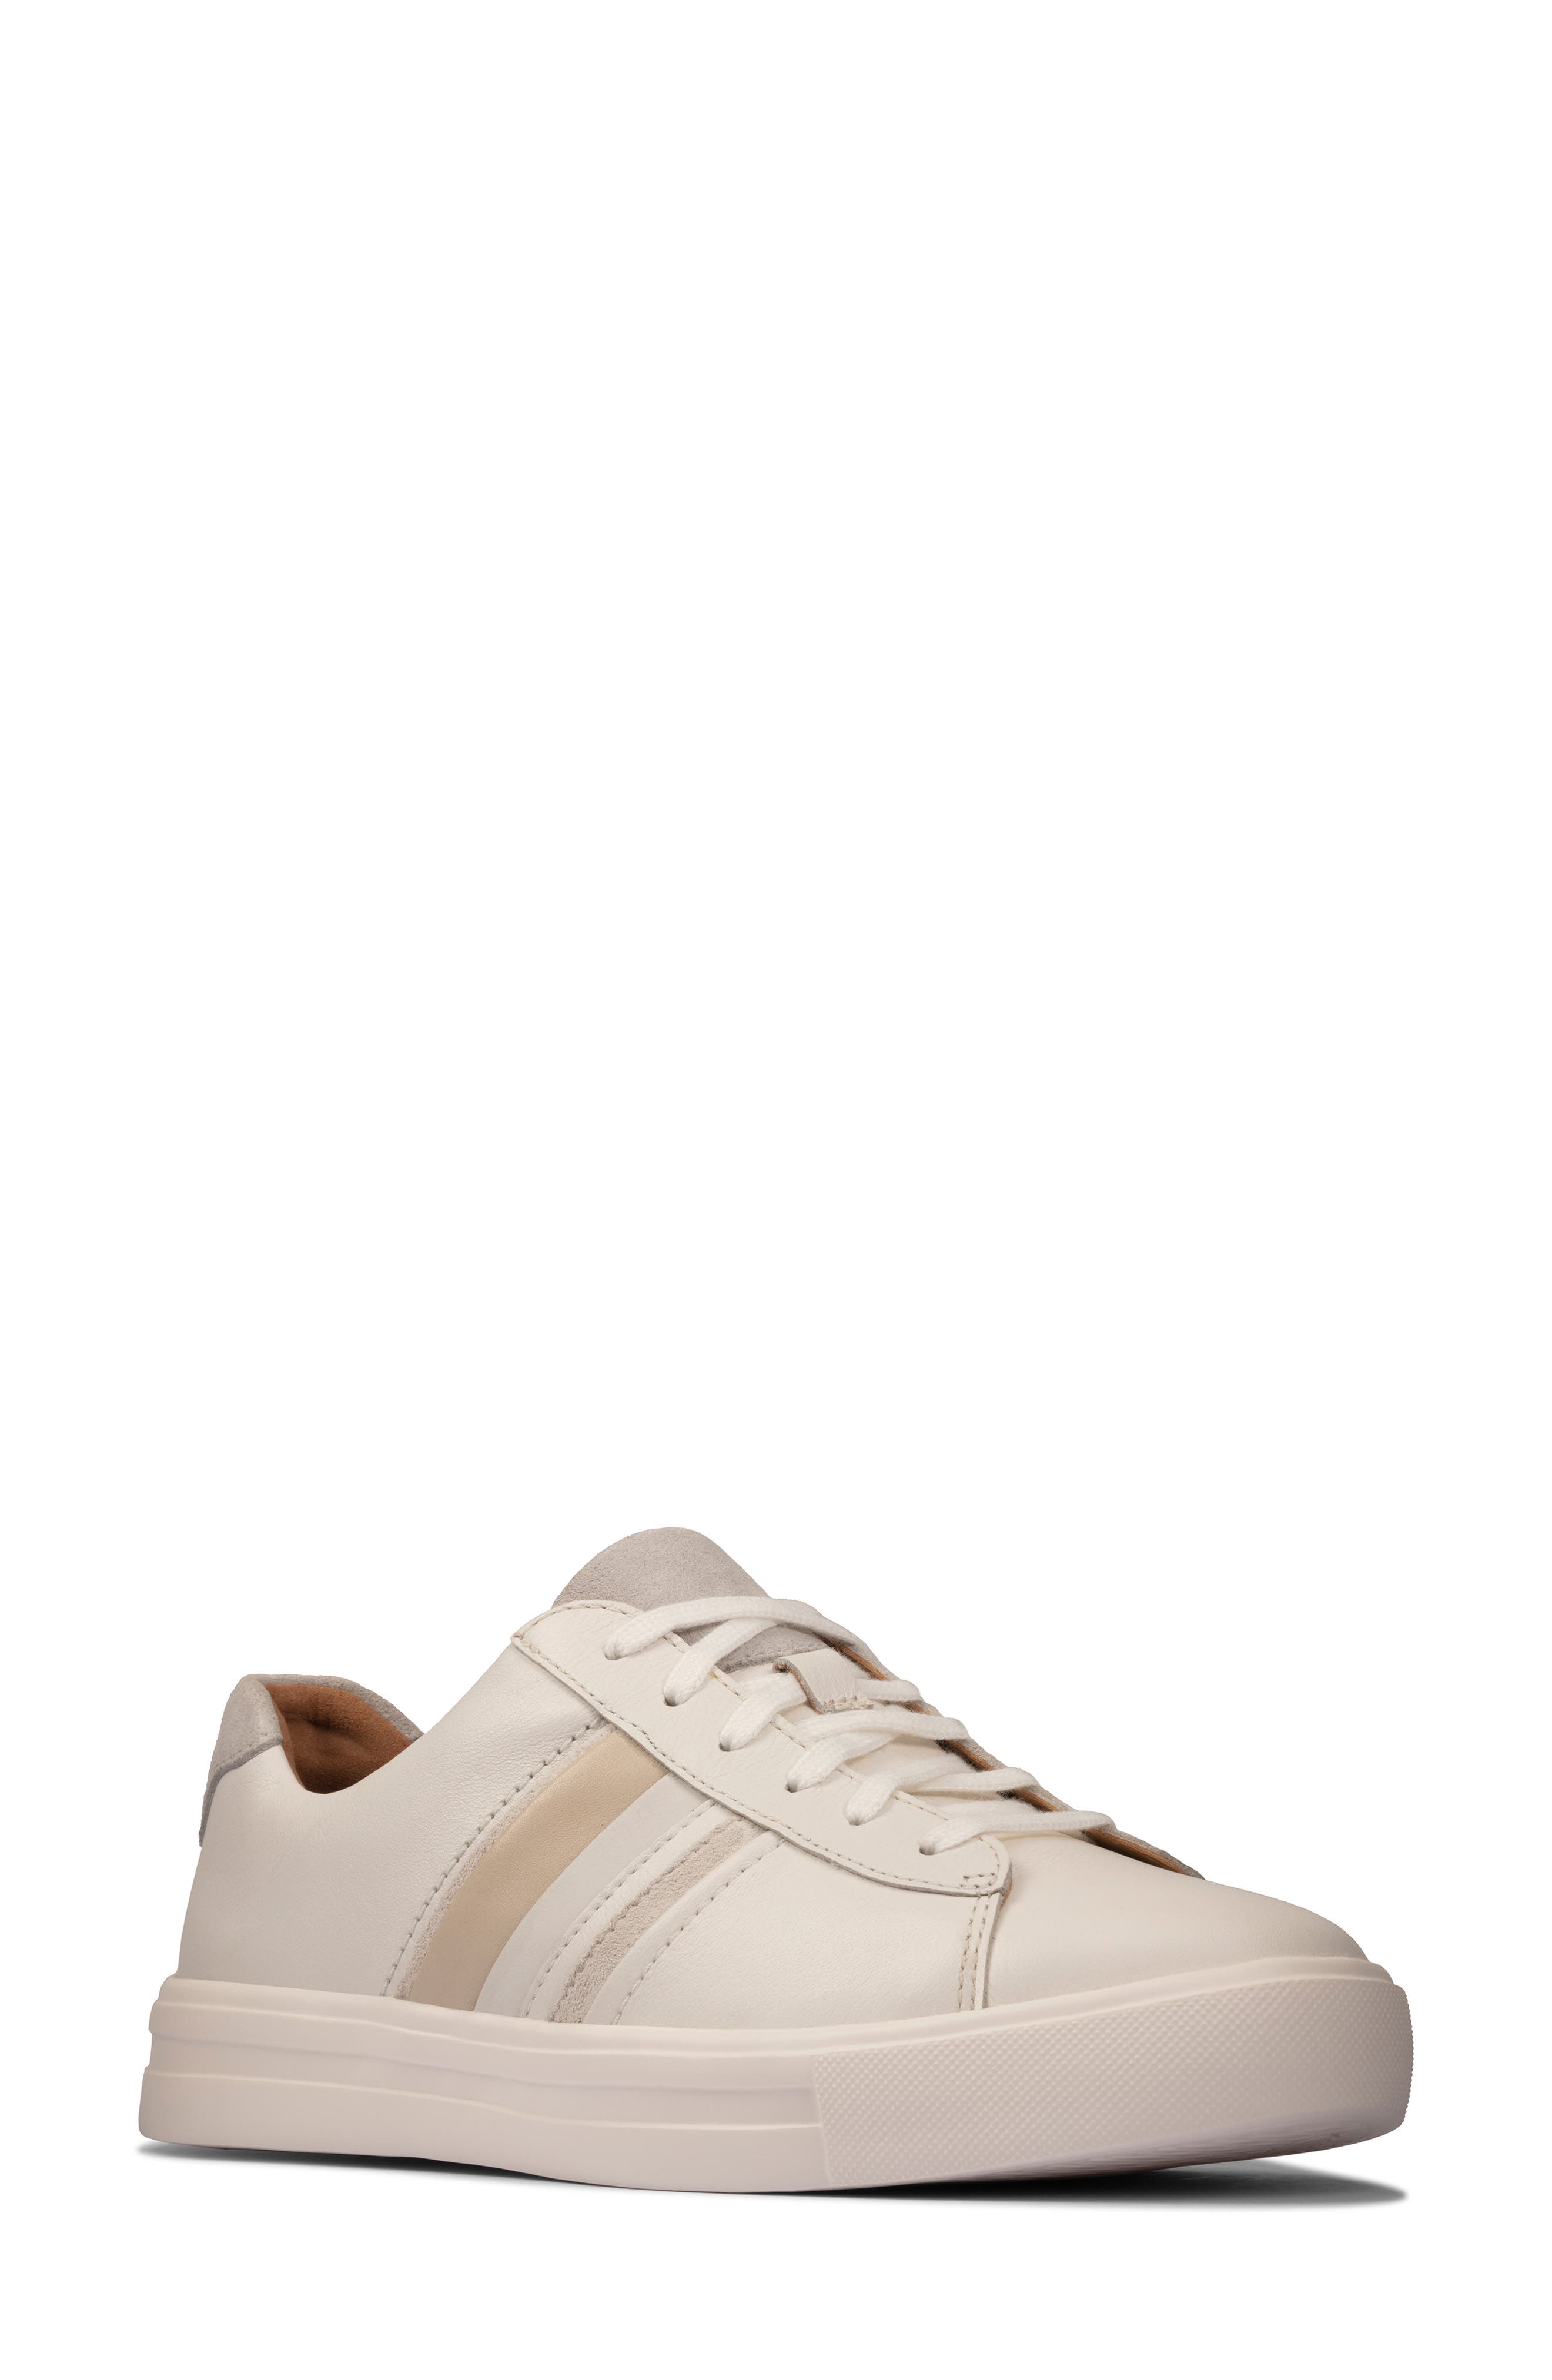 clarks white sneakers